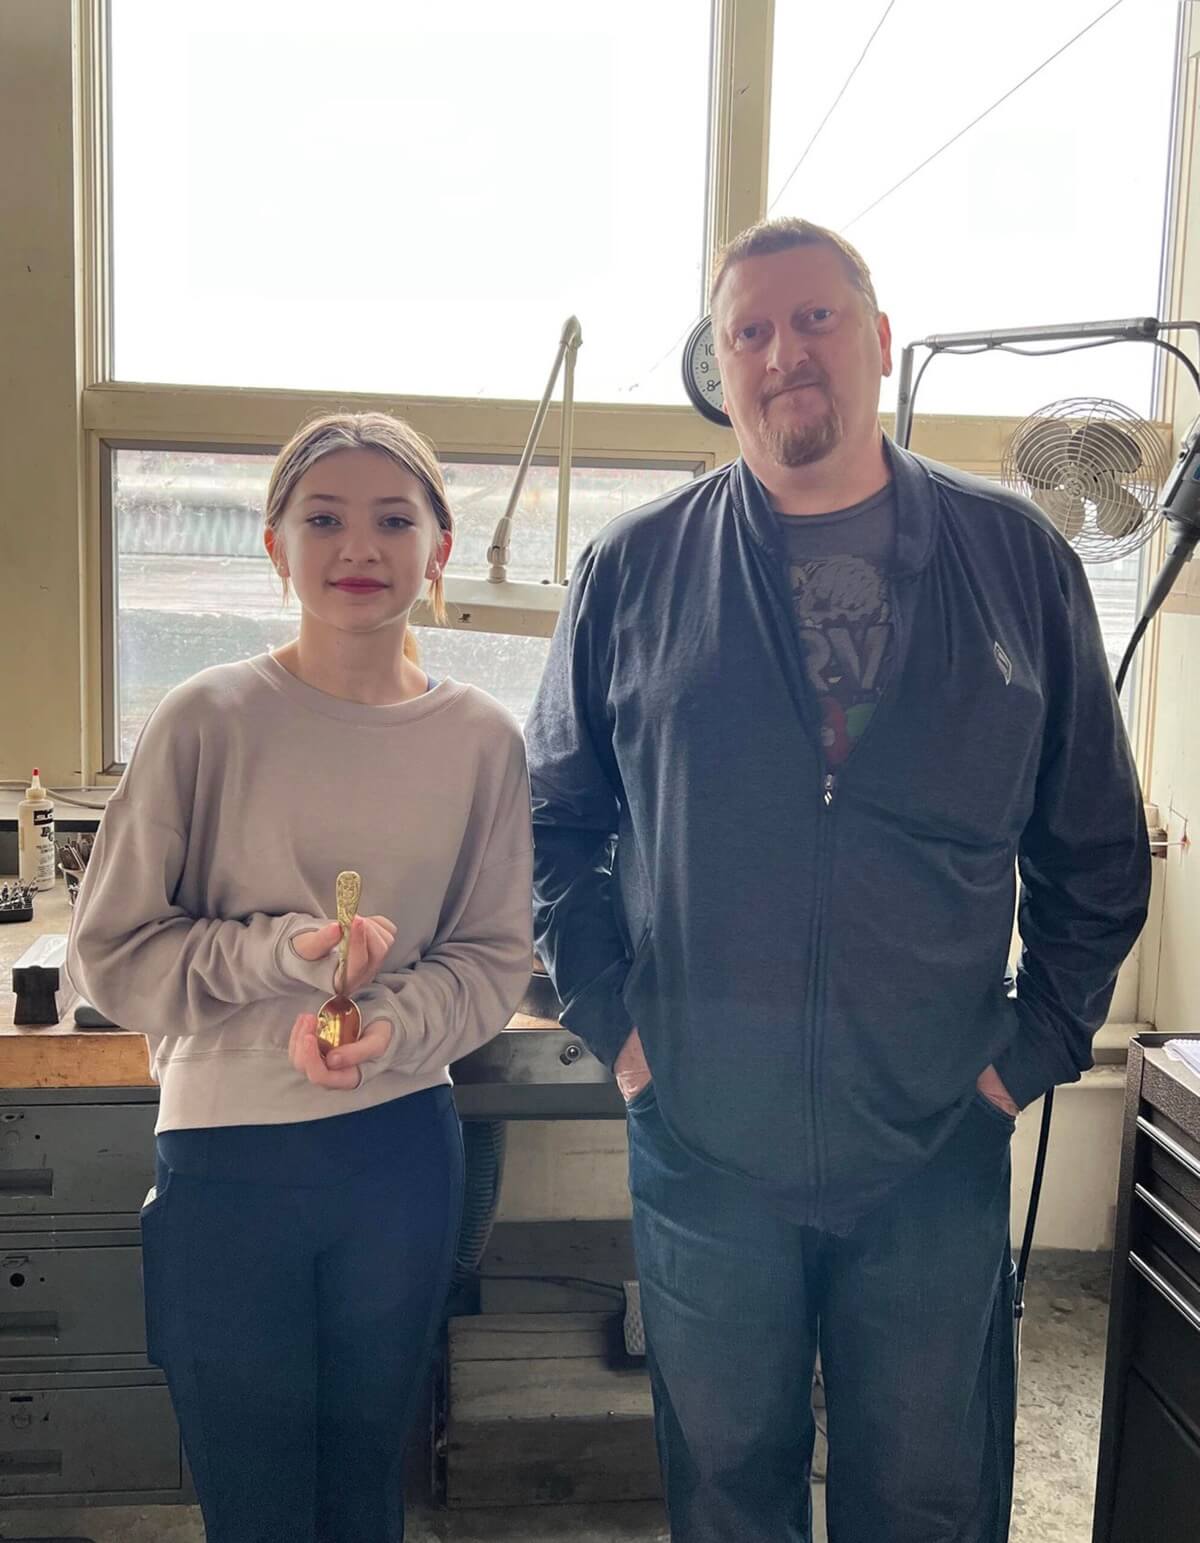 Isabella Lawrence with her Dad Eric Lawrence showing the Owl spoon design they created together. 